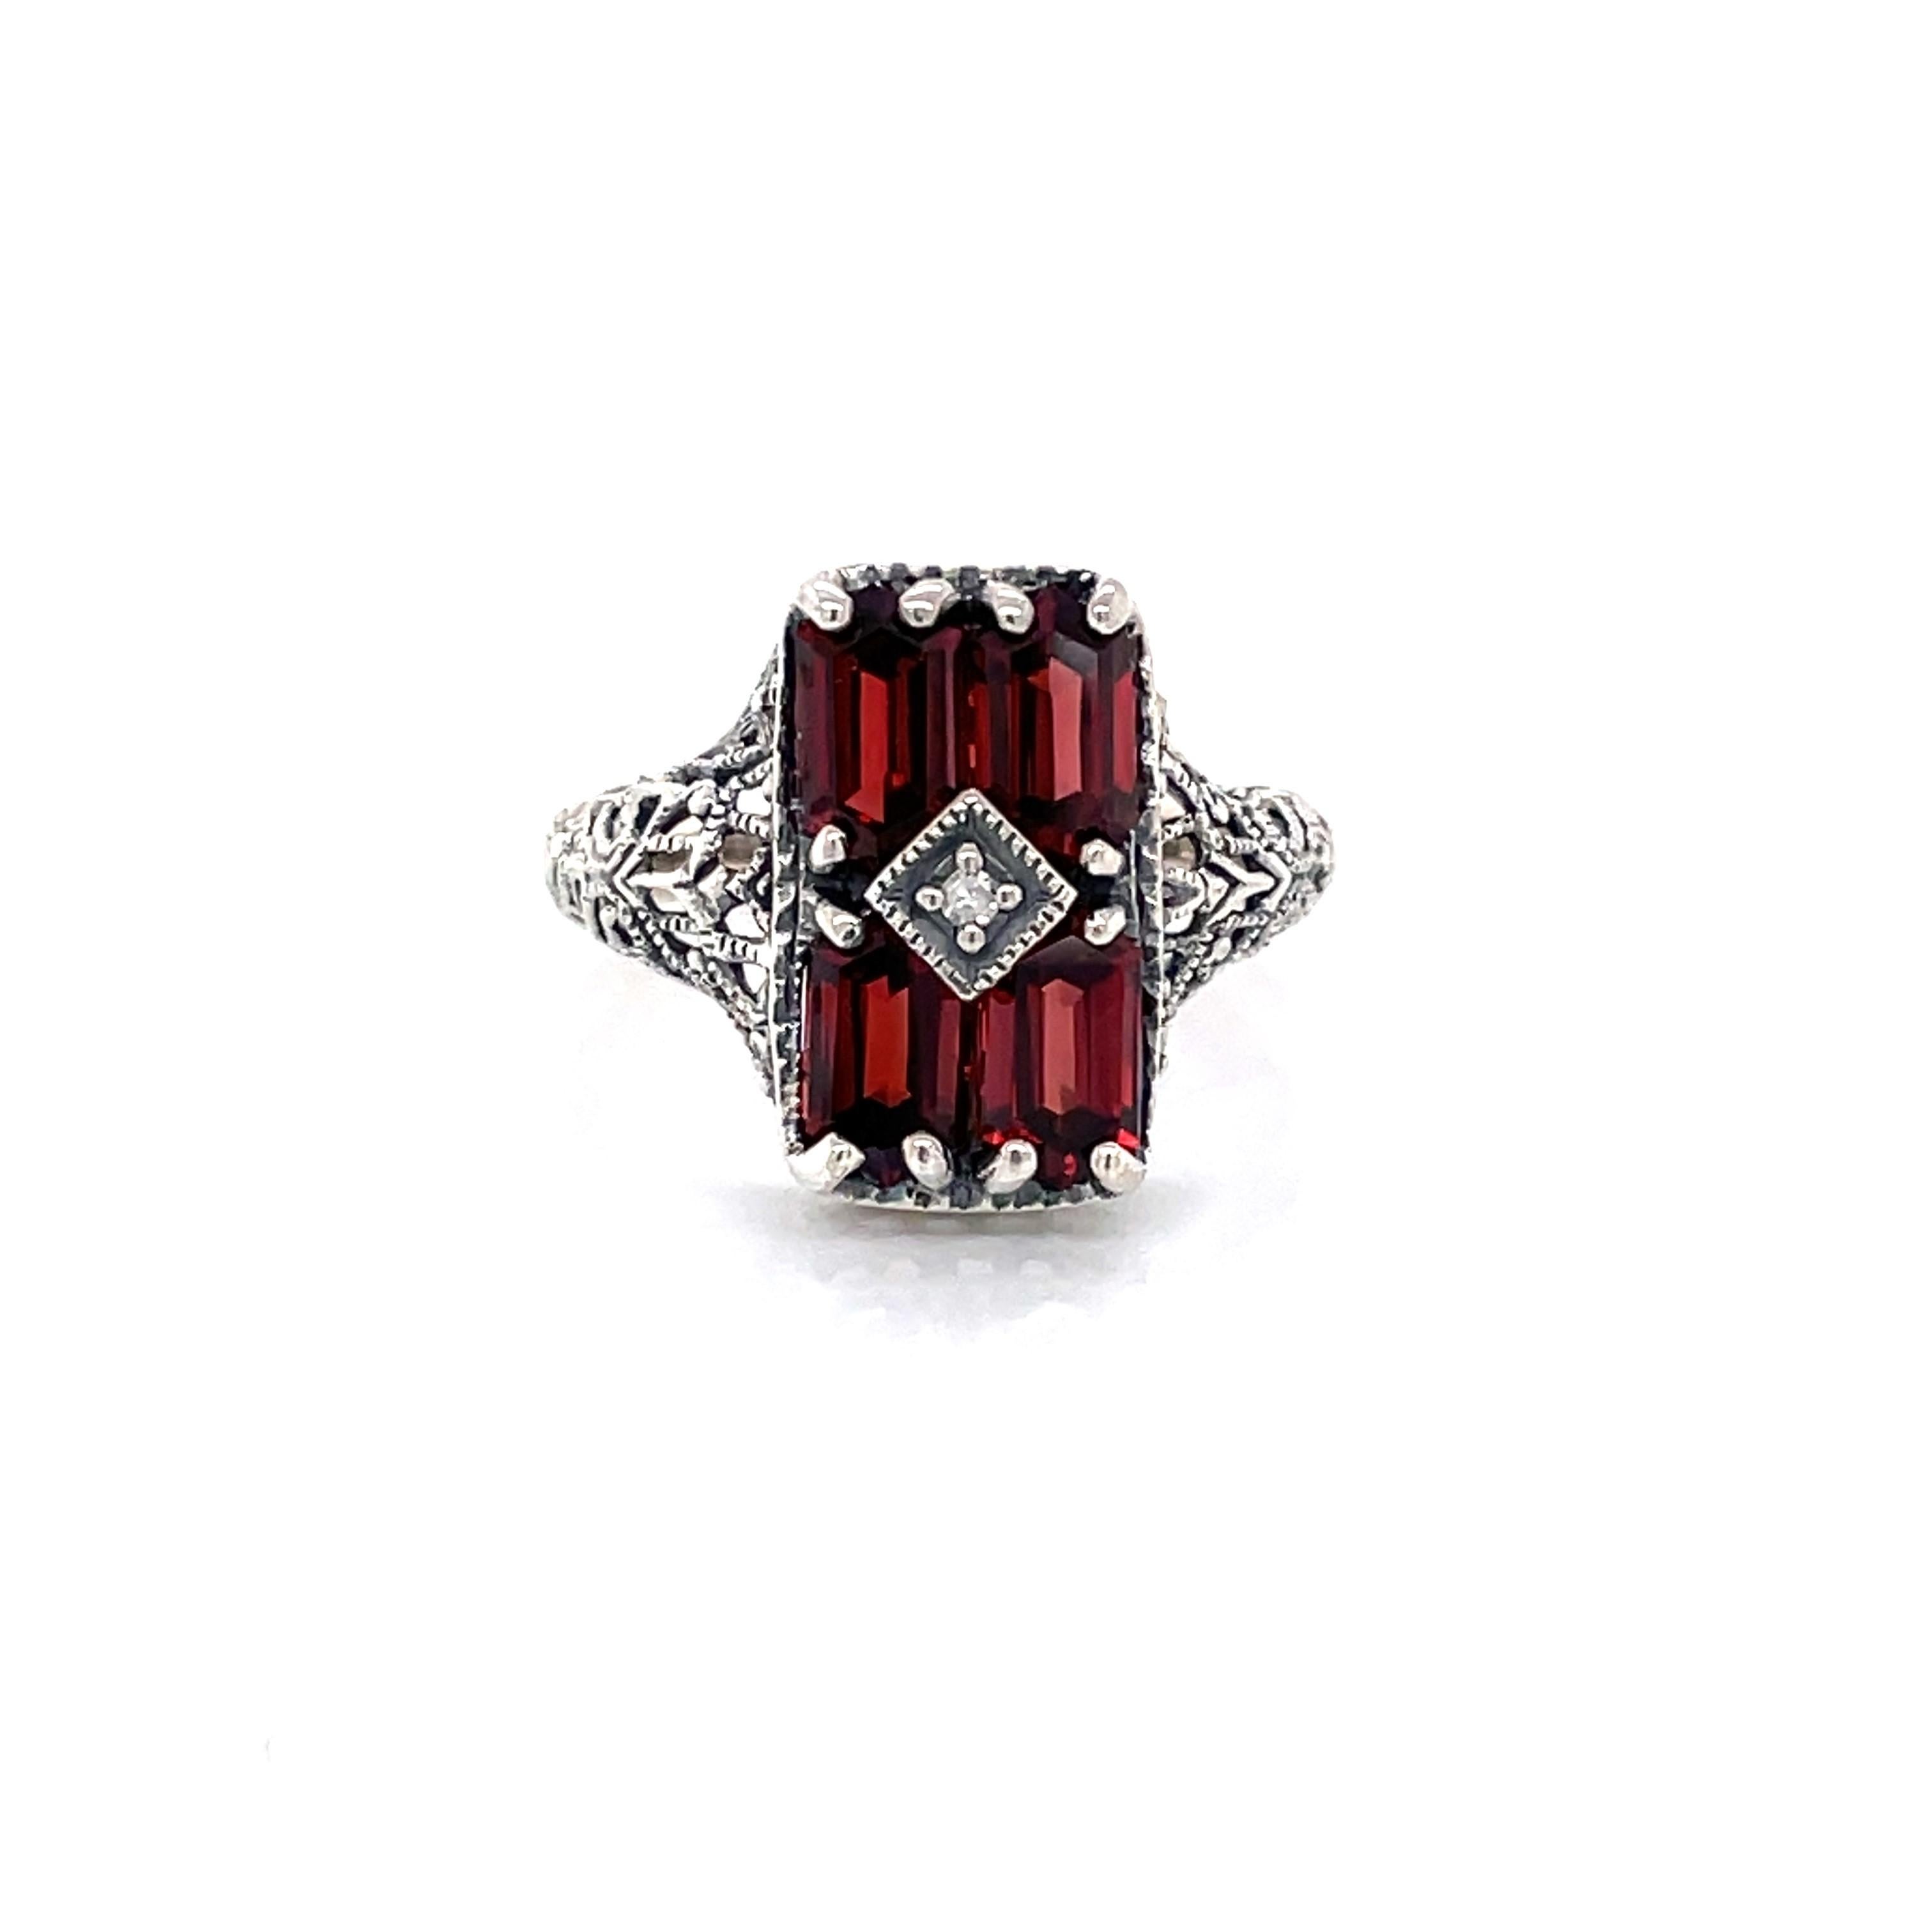 Four faceted emerald-cut deep red garnet stones grace the front of this antique style .925 sterling silver ring. 
In size 6. New and presented in miniature antique style gift box.